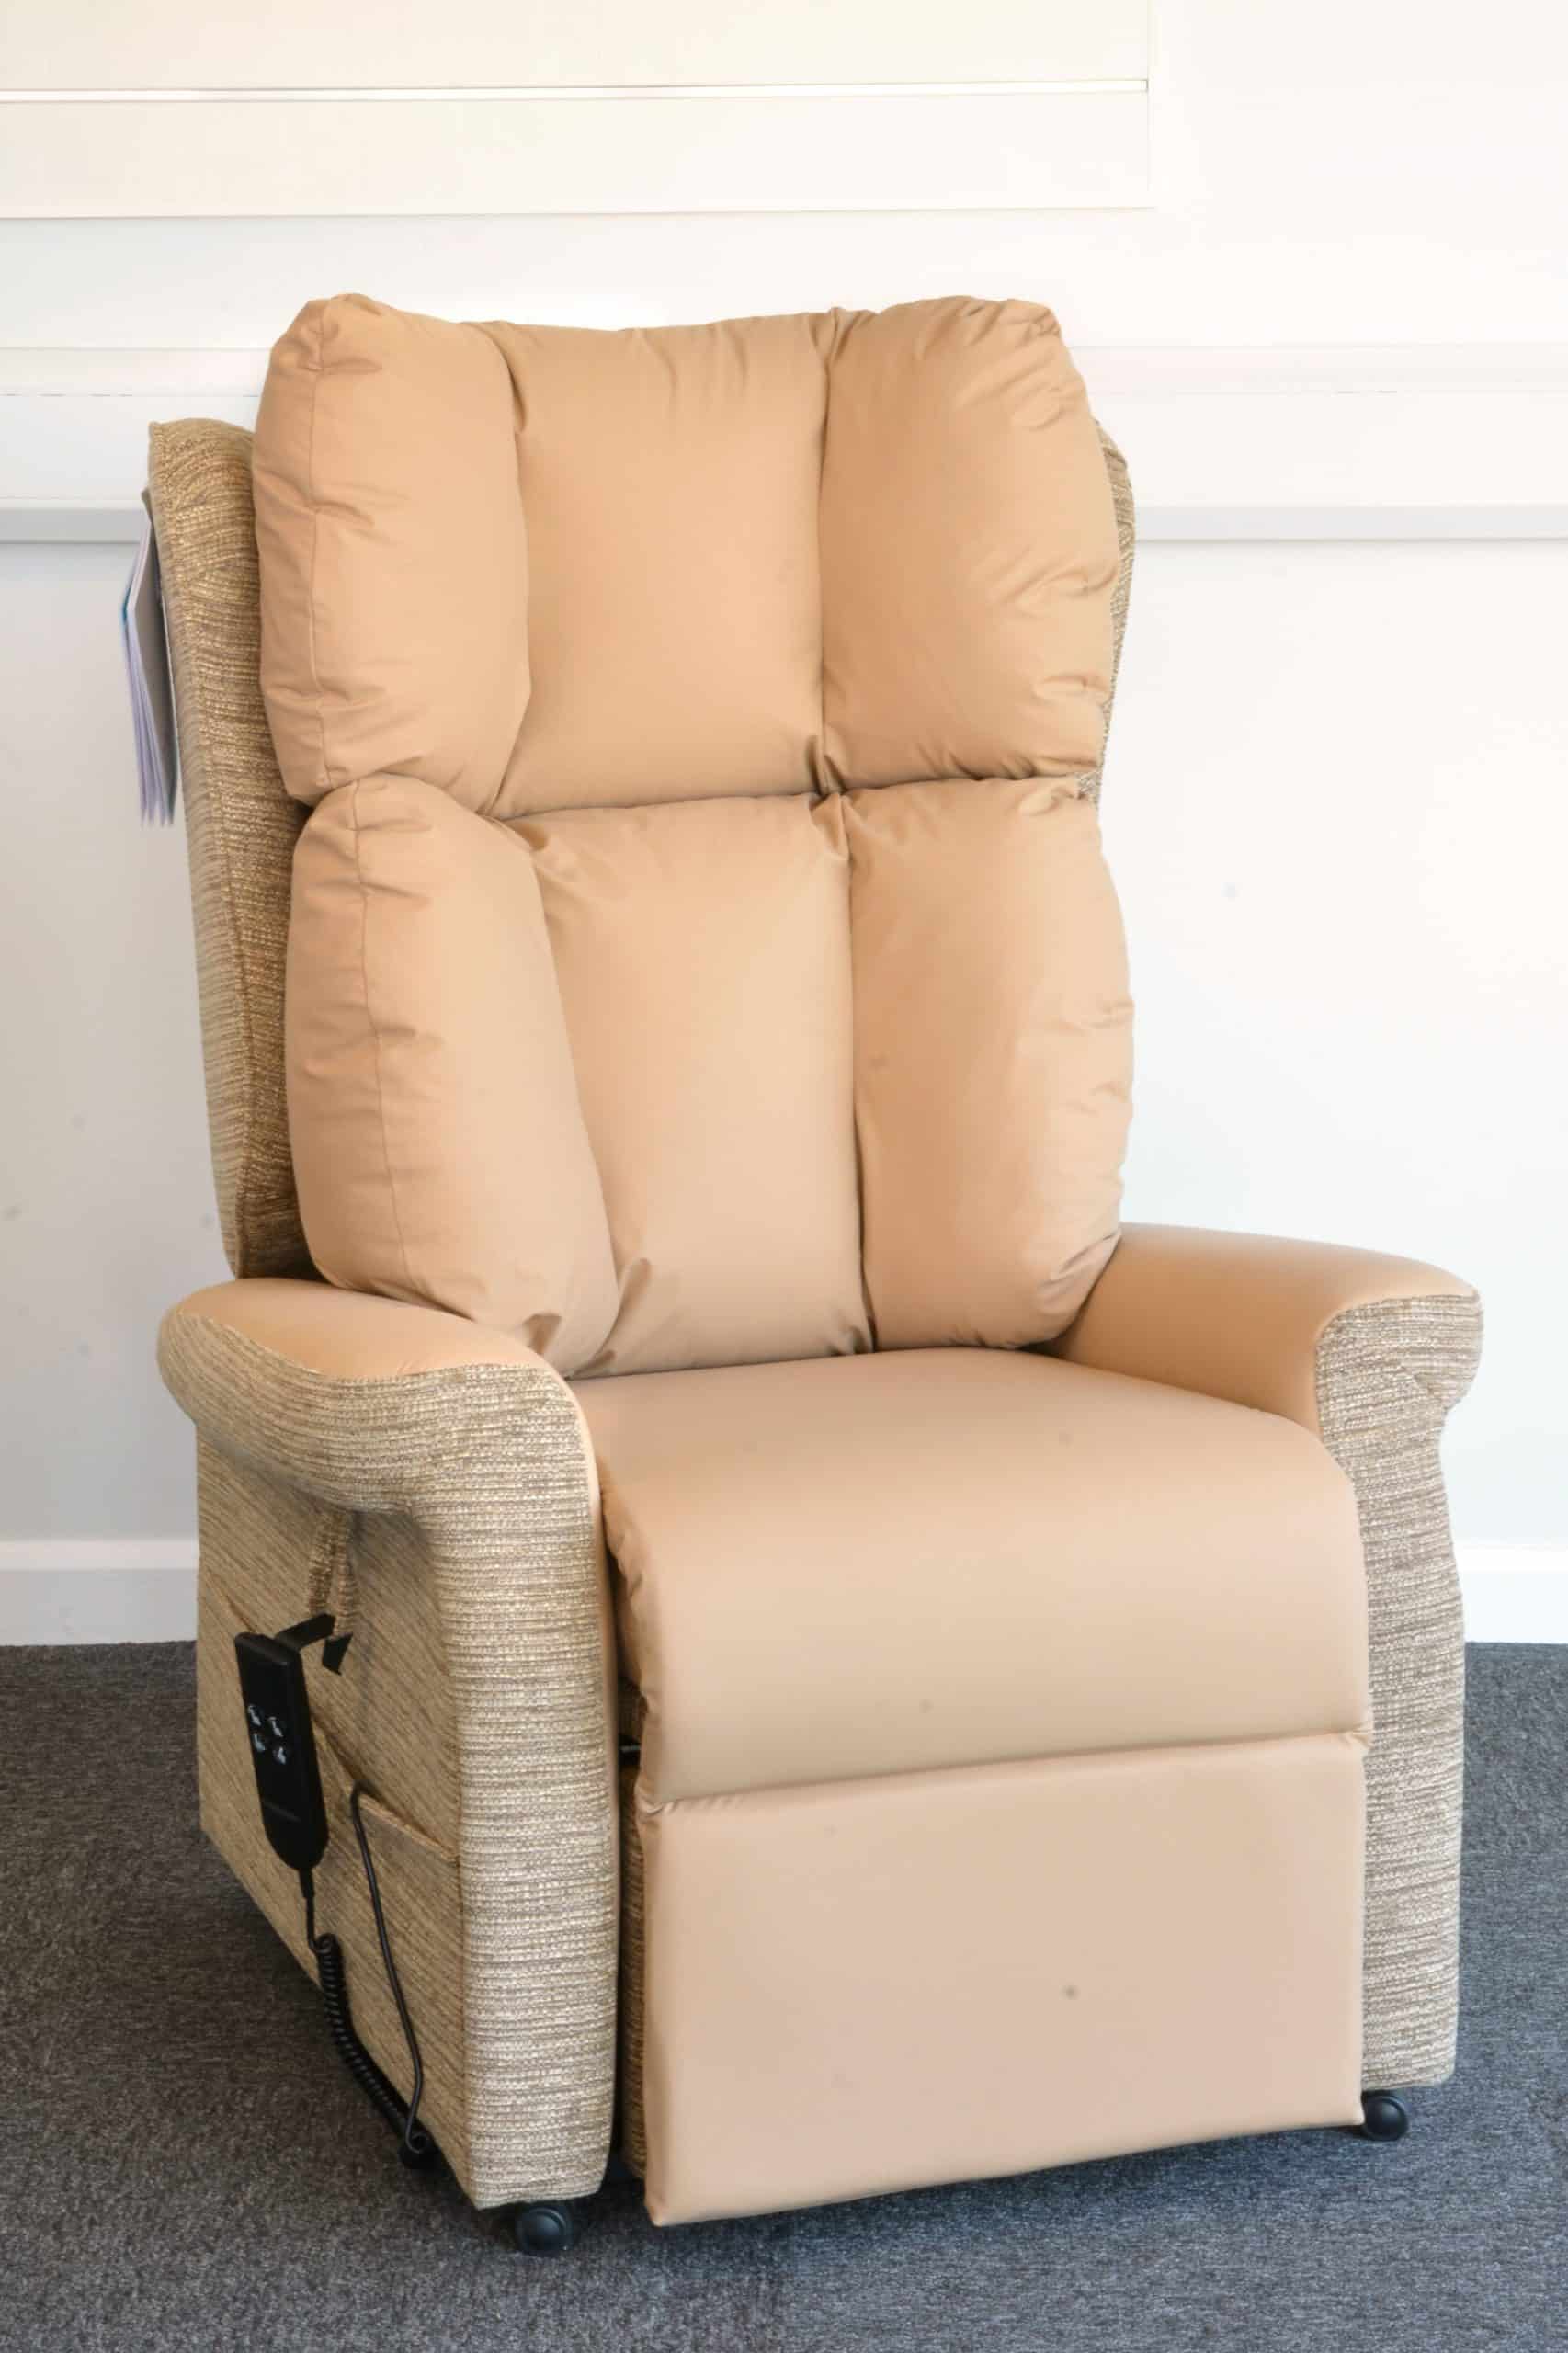 Made to measure riser recliner